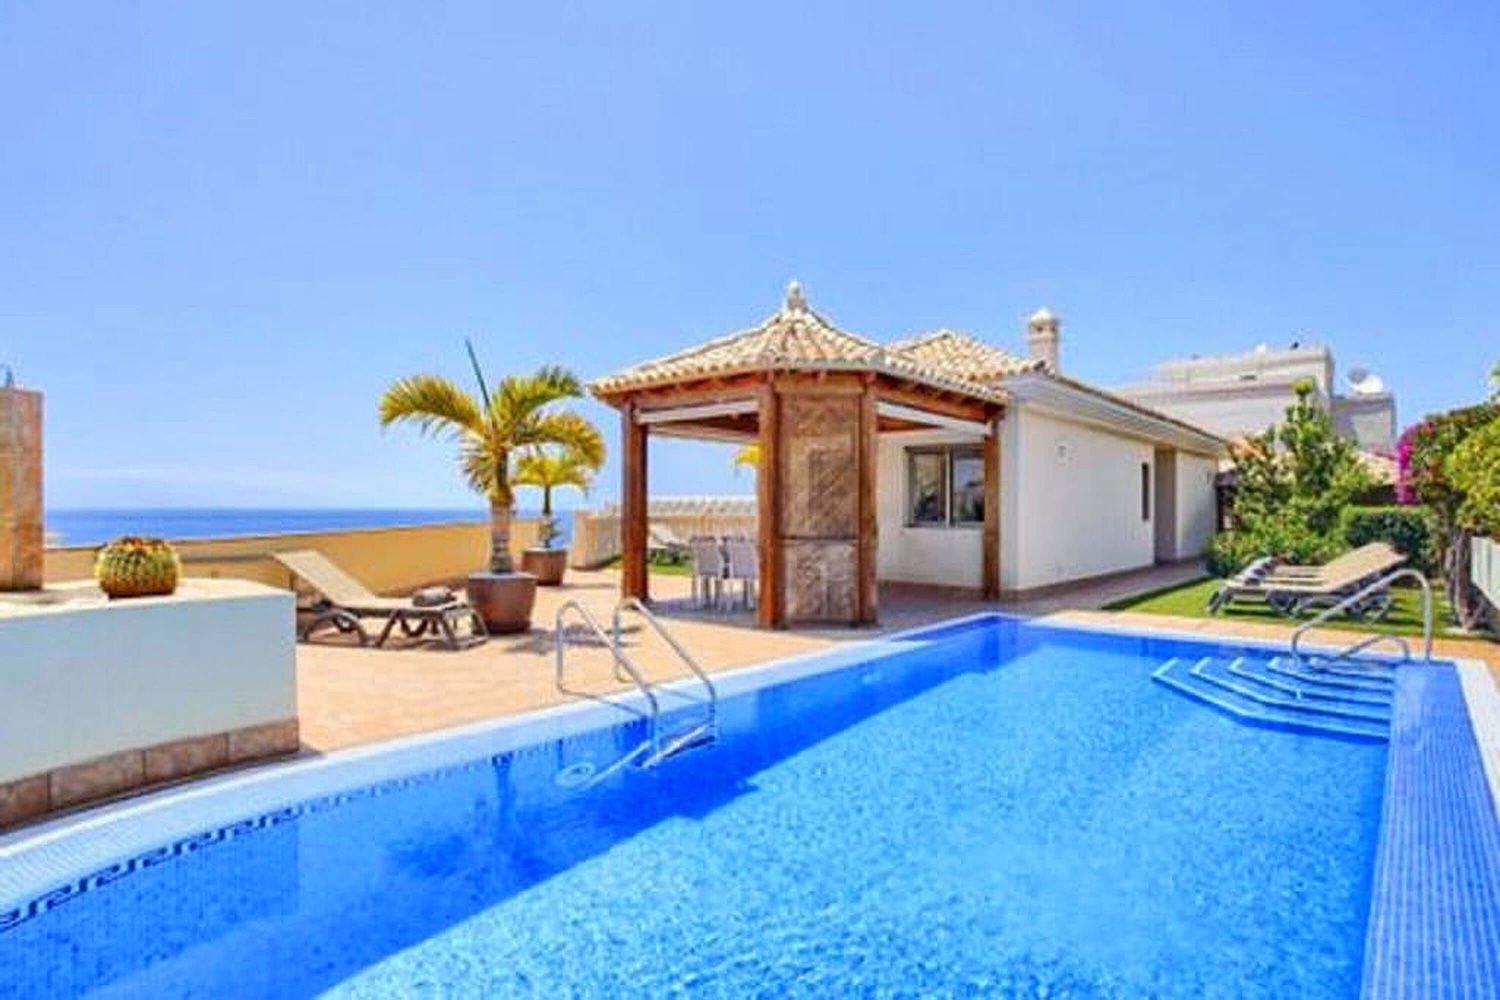 Independent, modern, spacious and bright villa. It is located in Puerto de Santiago and has magnificent views.